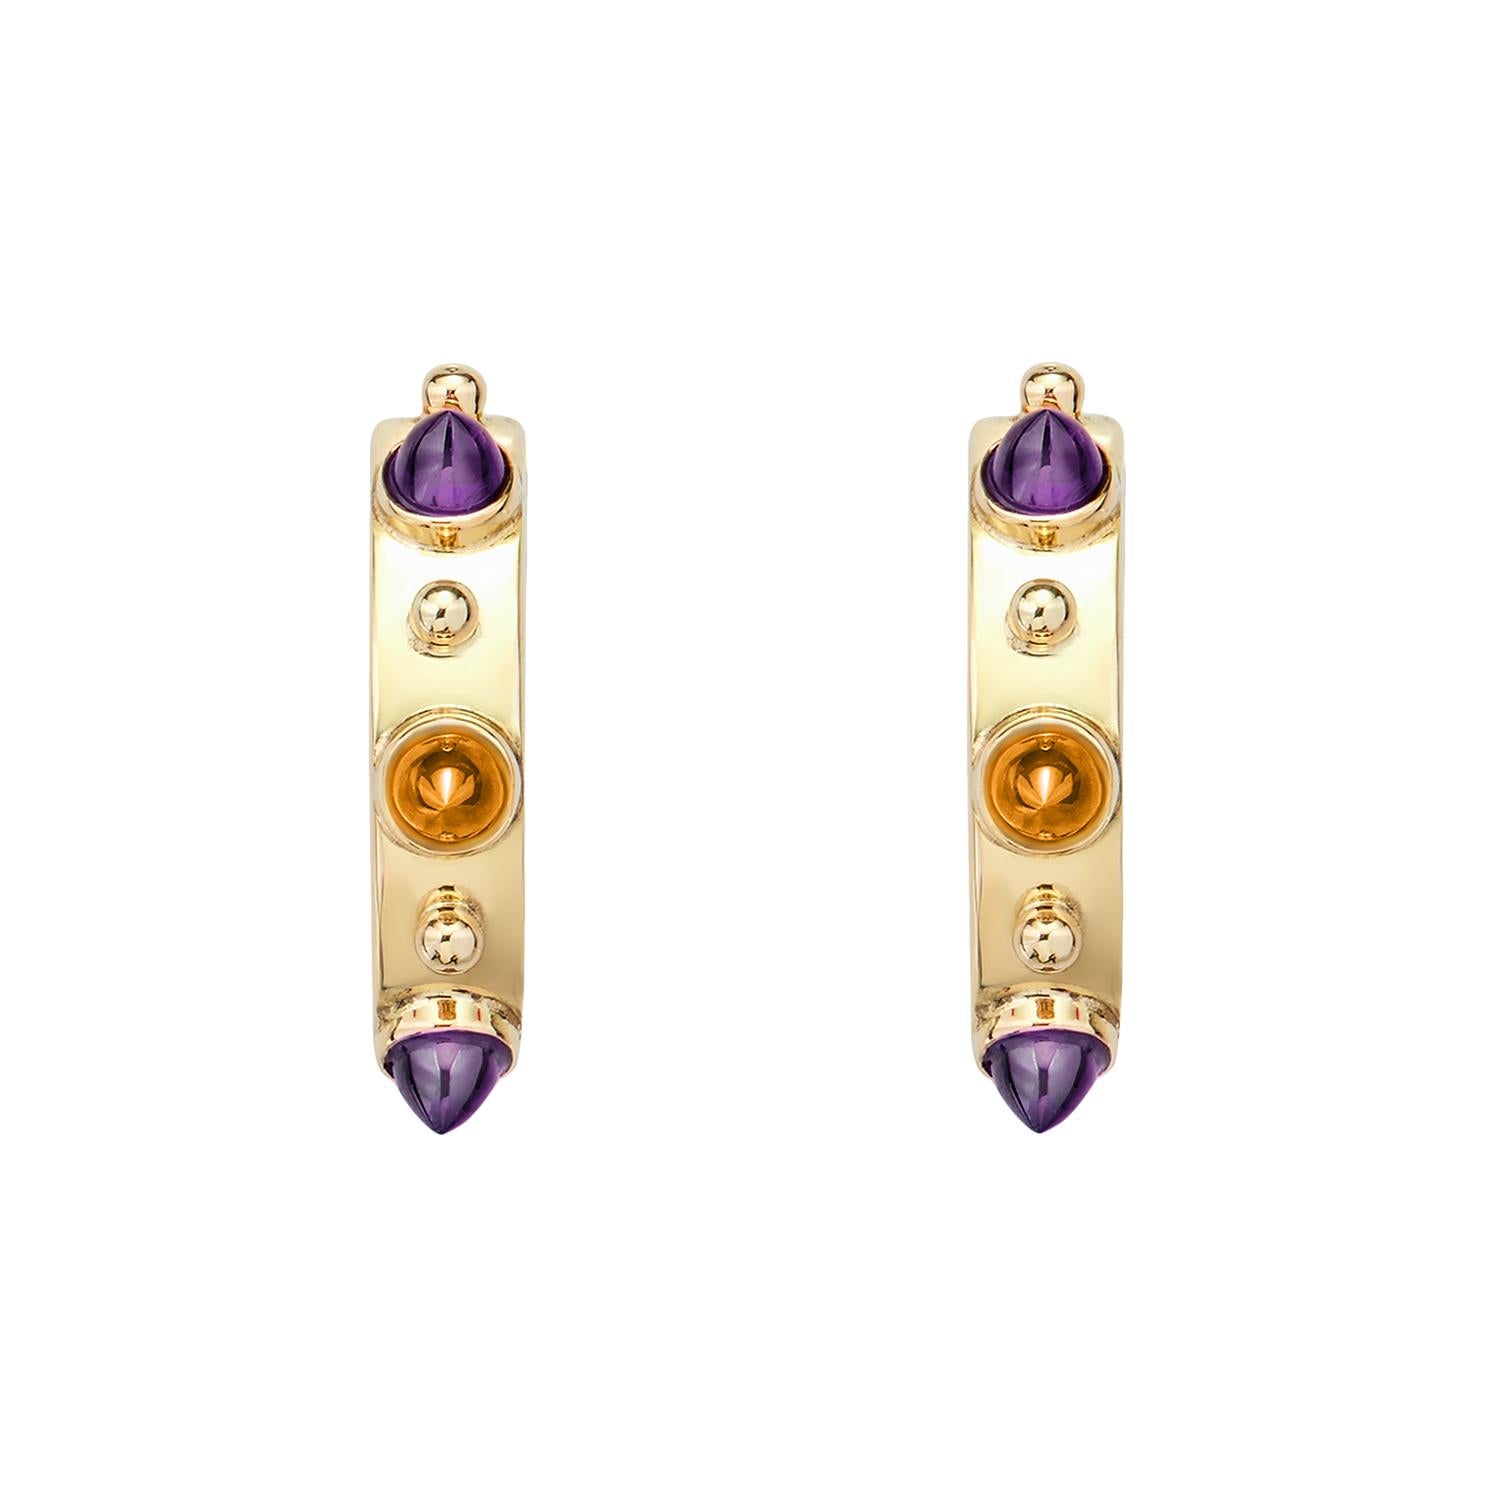 This DUBINI hoop earrings from the 'Empires' collection features our signature bullet garnet cabochons set in 18K yellow gold.

Please note that we offer a bespoke service. Should you wish to customise your piece by selecting from our range of